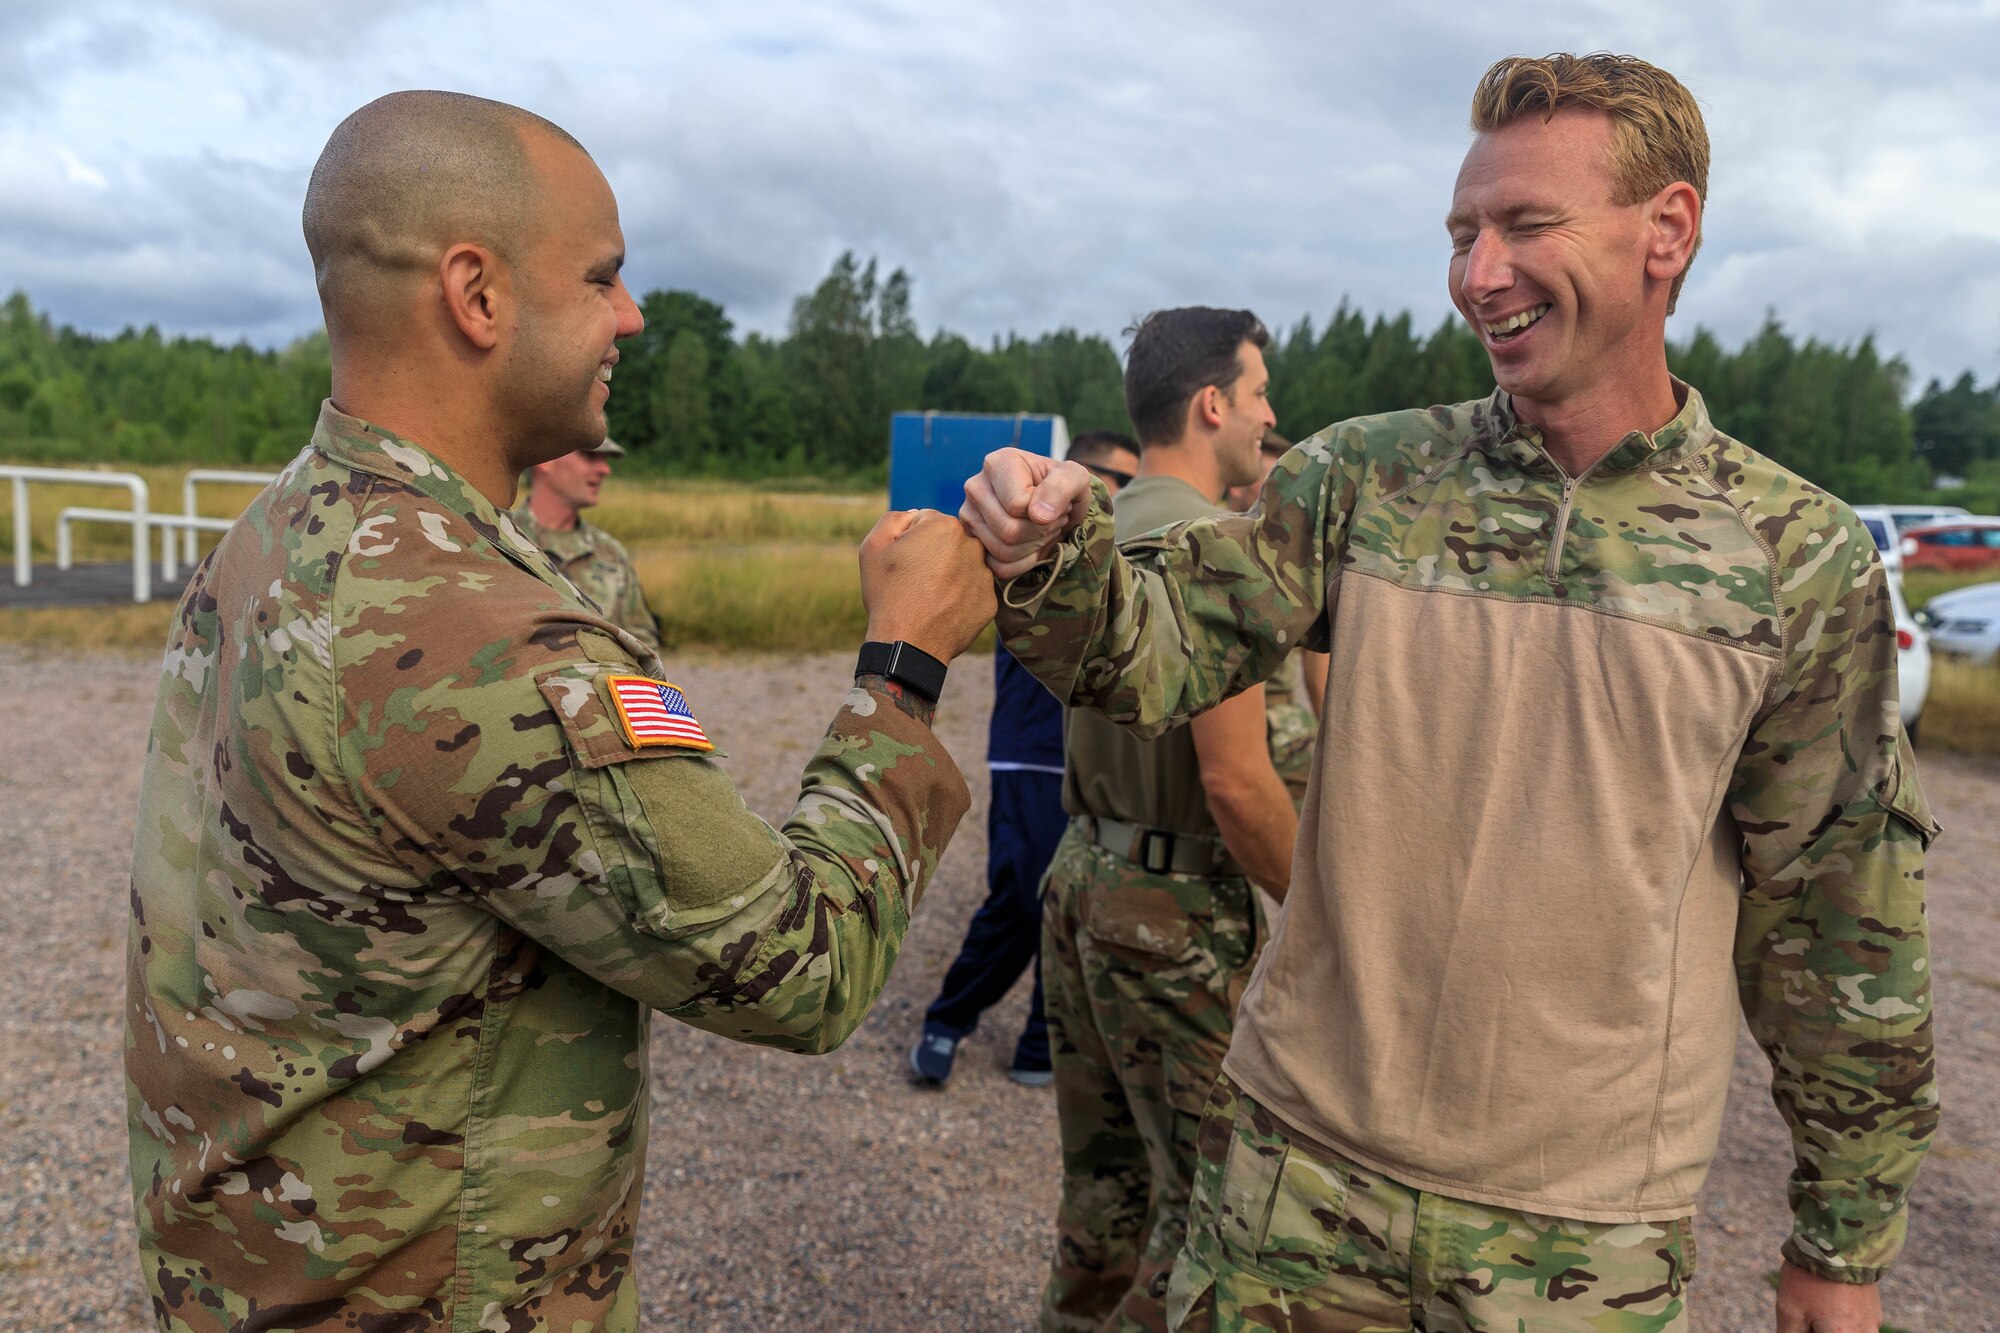 Staff Sgt. Devin Crawford, 108th Training Command, congratulates Rasmus Due, a competitor from the Danish reserve force, after completing of the land obstacle course during the Interallied Confederation of Reserve Officers military competition in Lahti, Finland on July 31st. The CIOR MILCOMP is an annual competition among NATO and Partnership for Peace nations. This competition test reserve service members from allied nations on several core disciplines in teams of three.